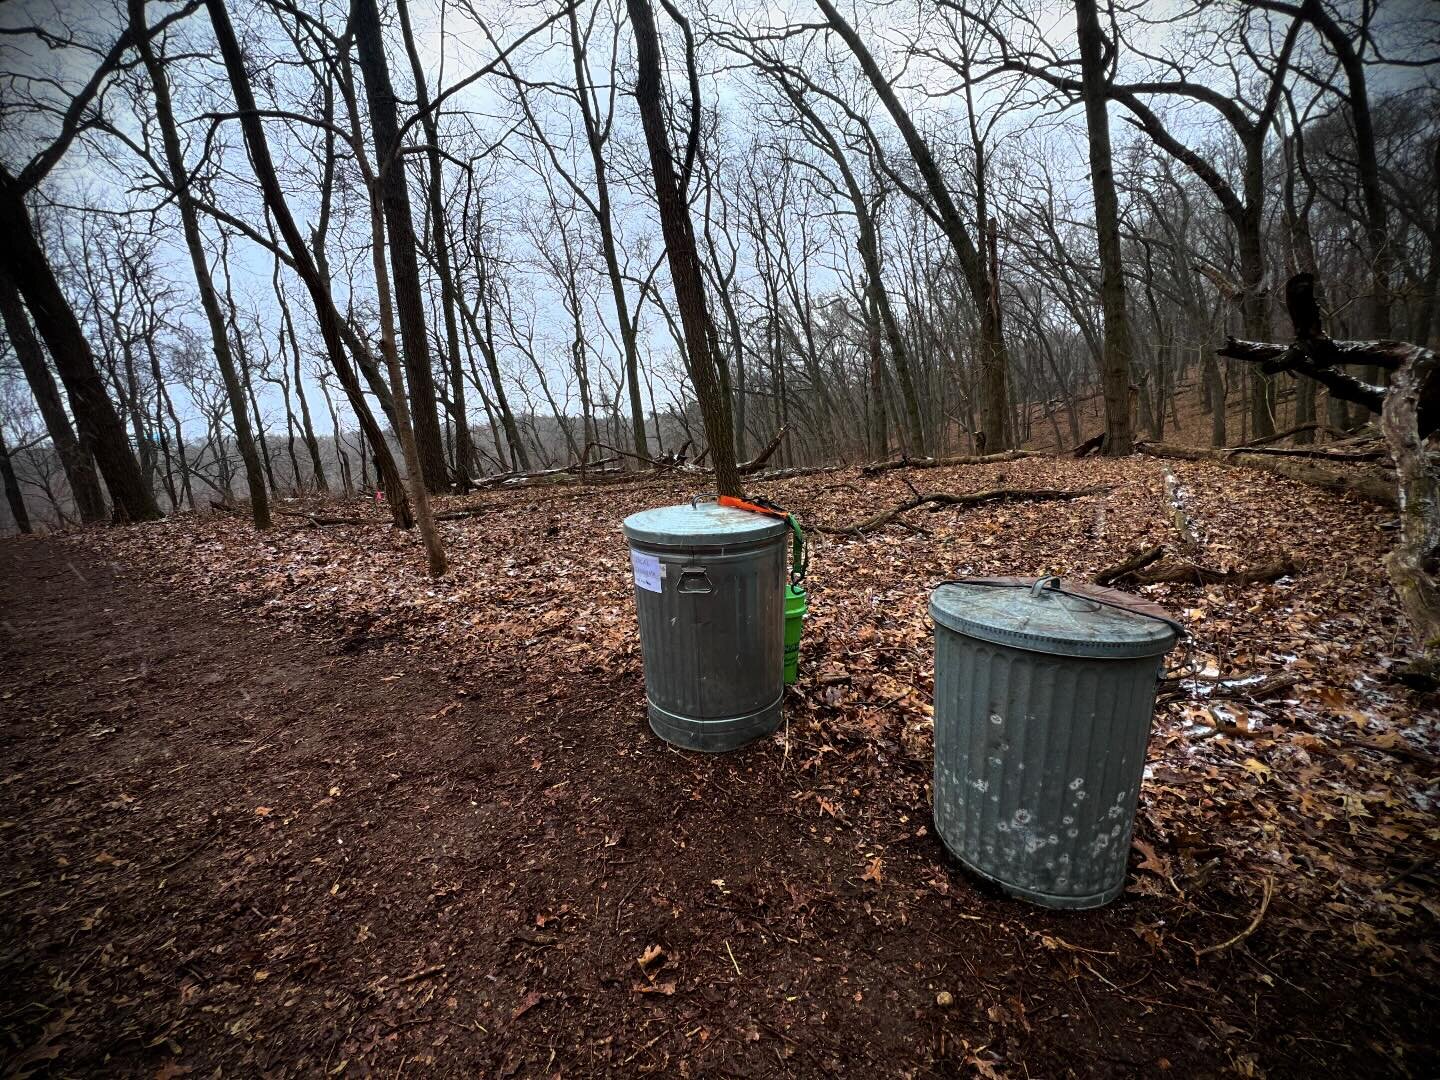 Seeding!!!! Last night we seeded the area formerly known as &ldquo;Honeysuckle Hill&rdquo; with a native woodland mix from @greatlakesnativeseed . Those two garbage cans are full of seed! Now we wait (like two years or more!!) for it to fill in. If y